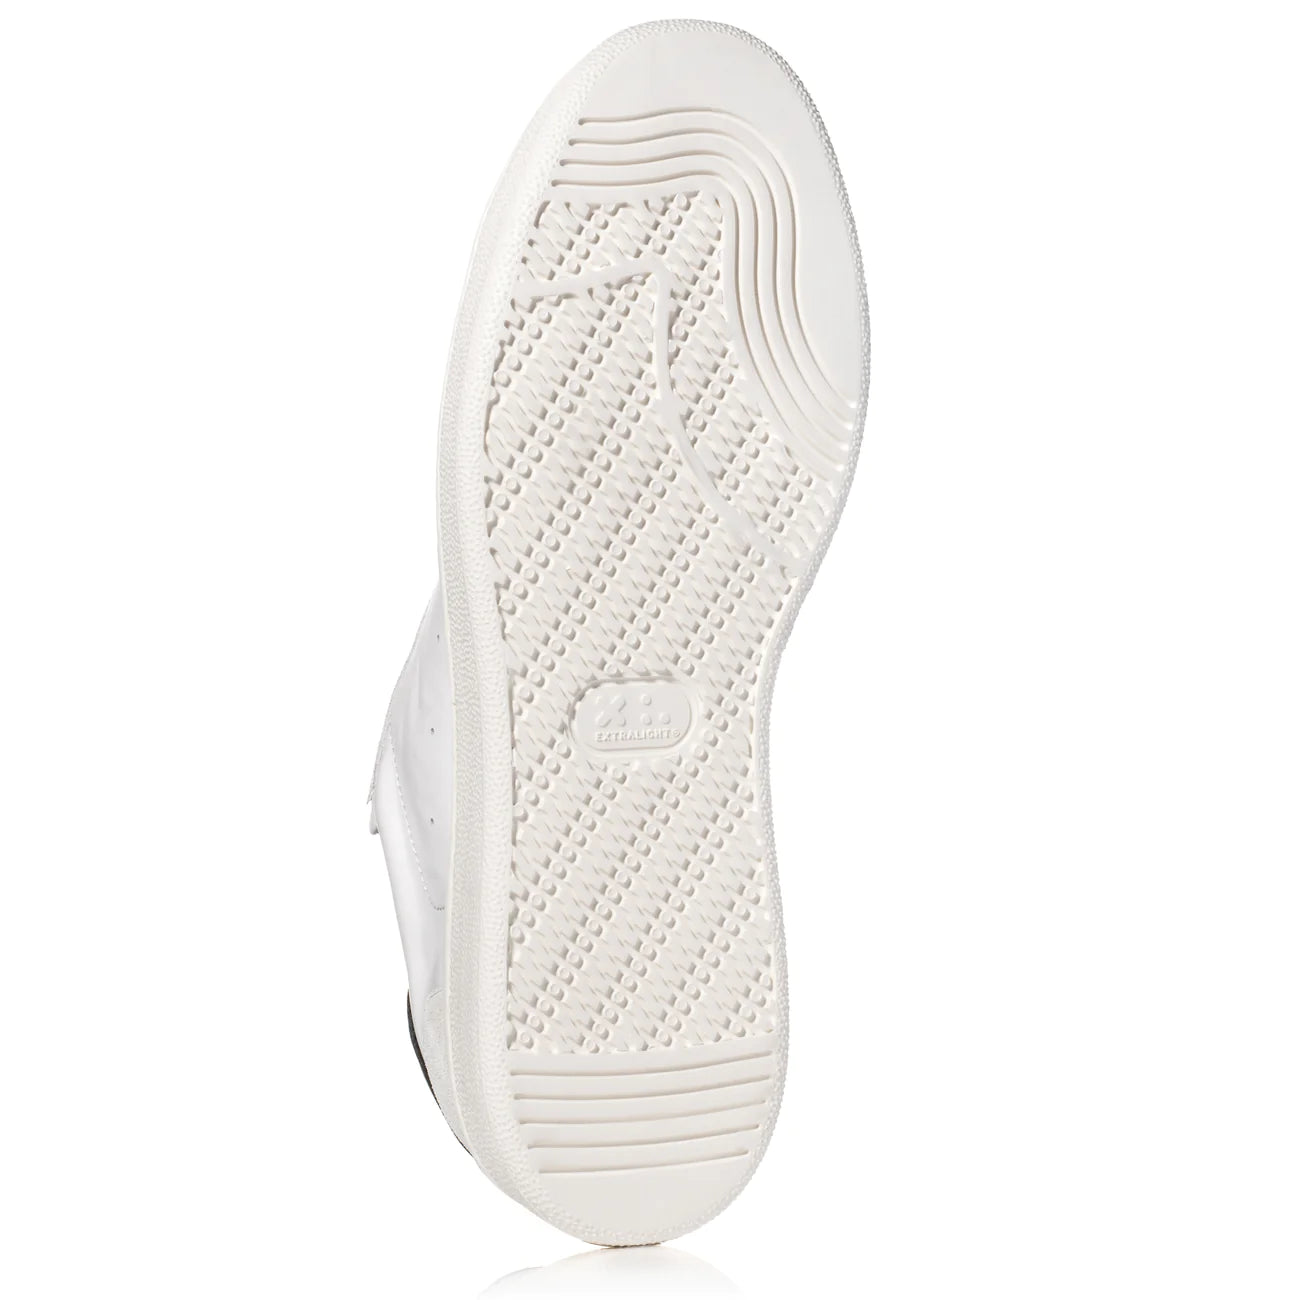 To Boot Cheadle Sneaker Bianco